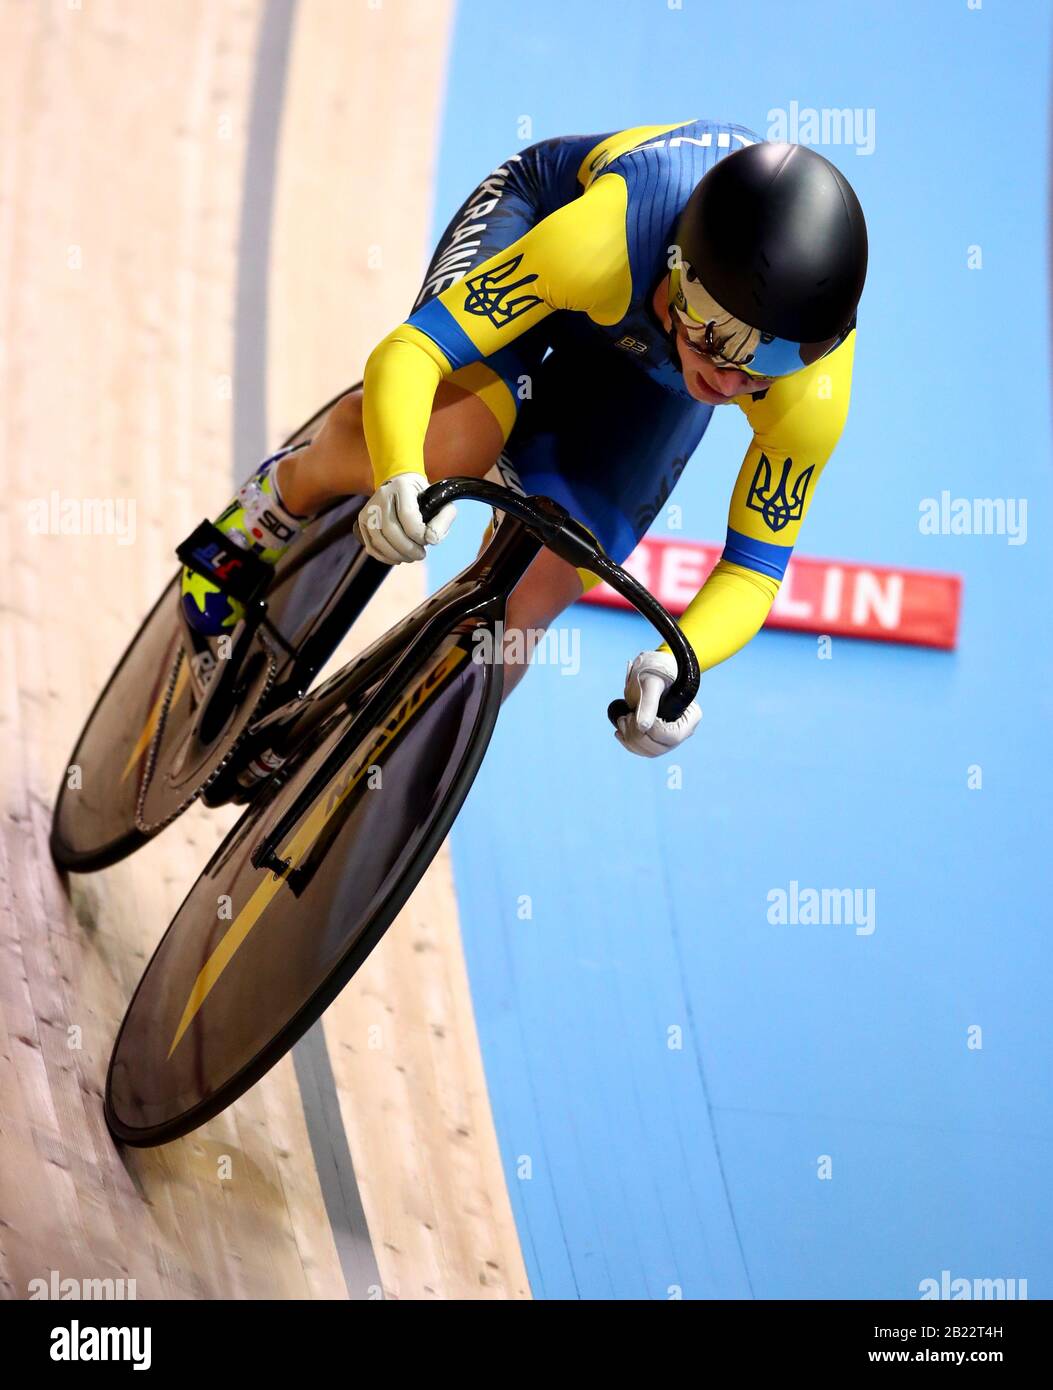 Ukraine's Olena Starikova in action during the Women's 500m time trial during day four of the 2020 UCI Track Cycling World Championships at Velodrom, Berlin. Stock Photo